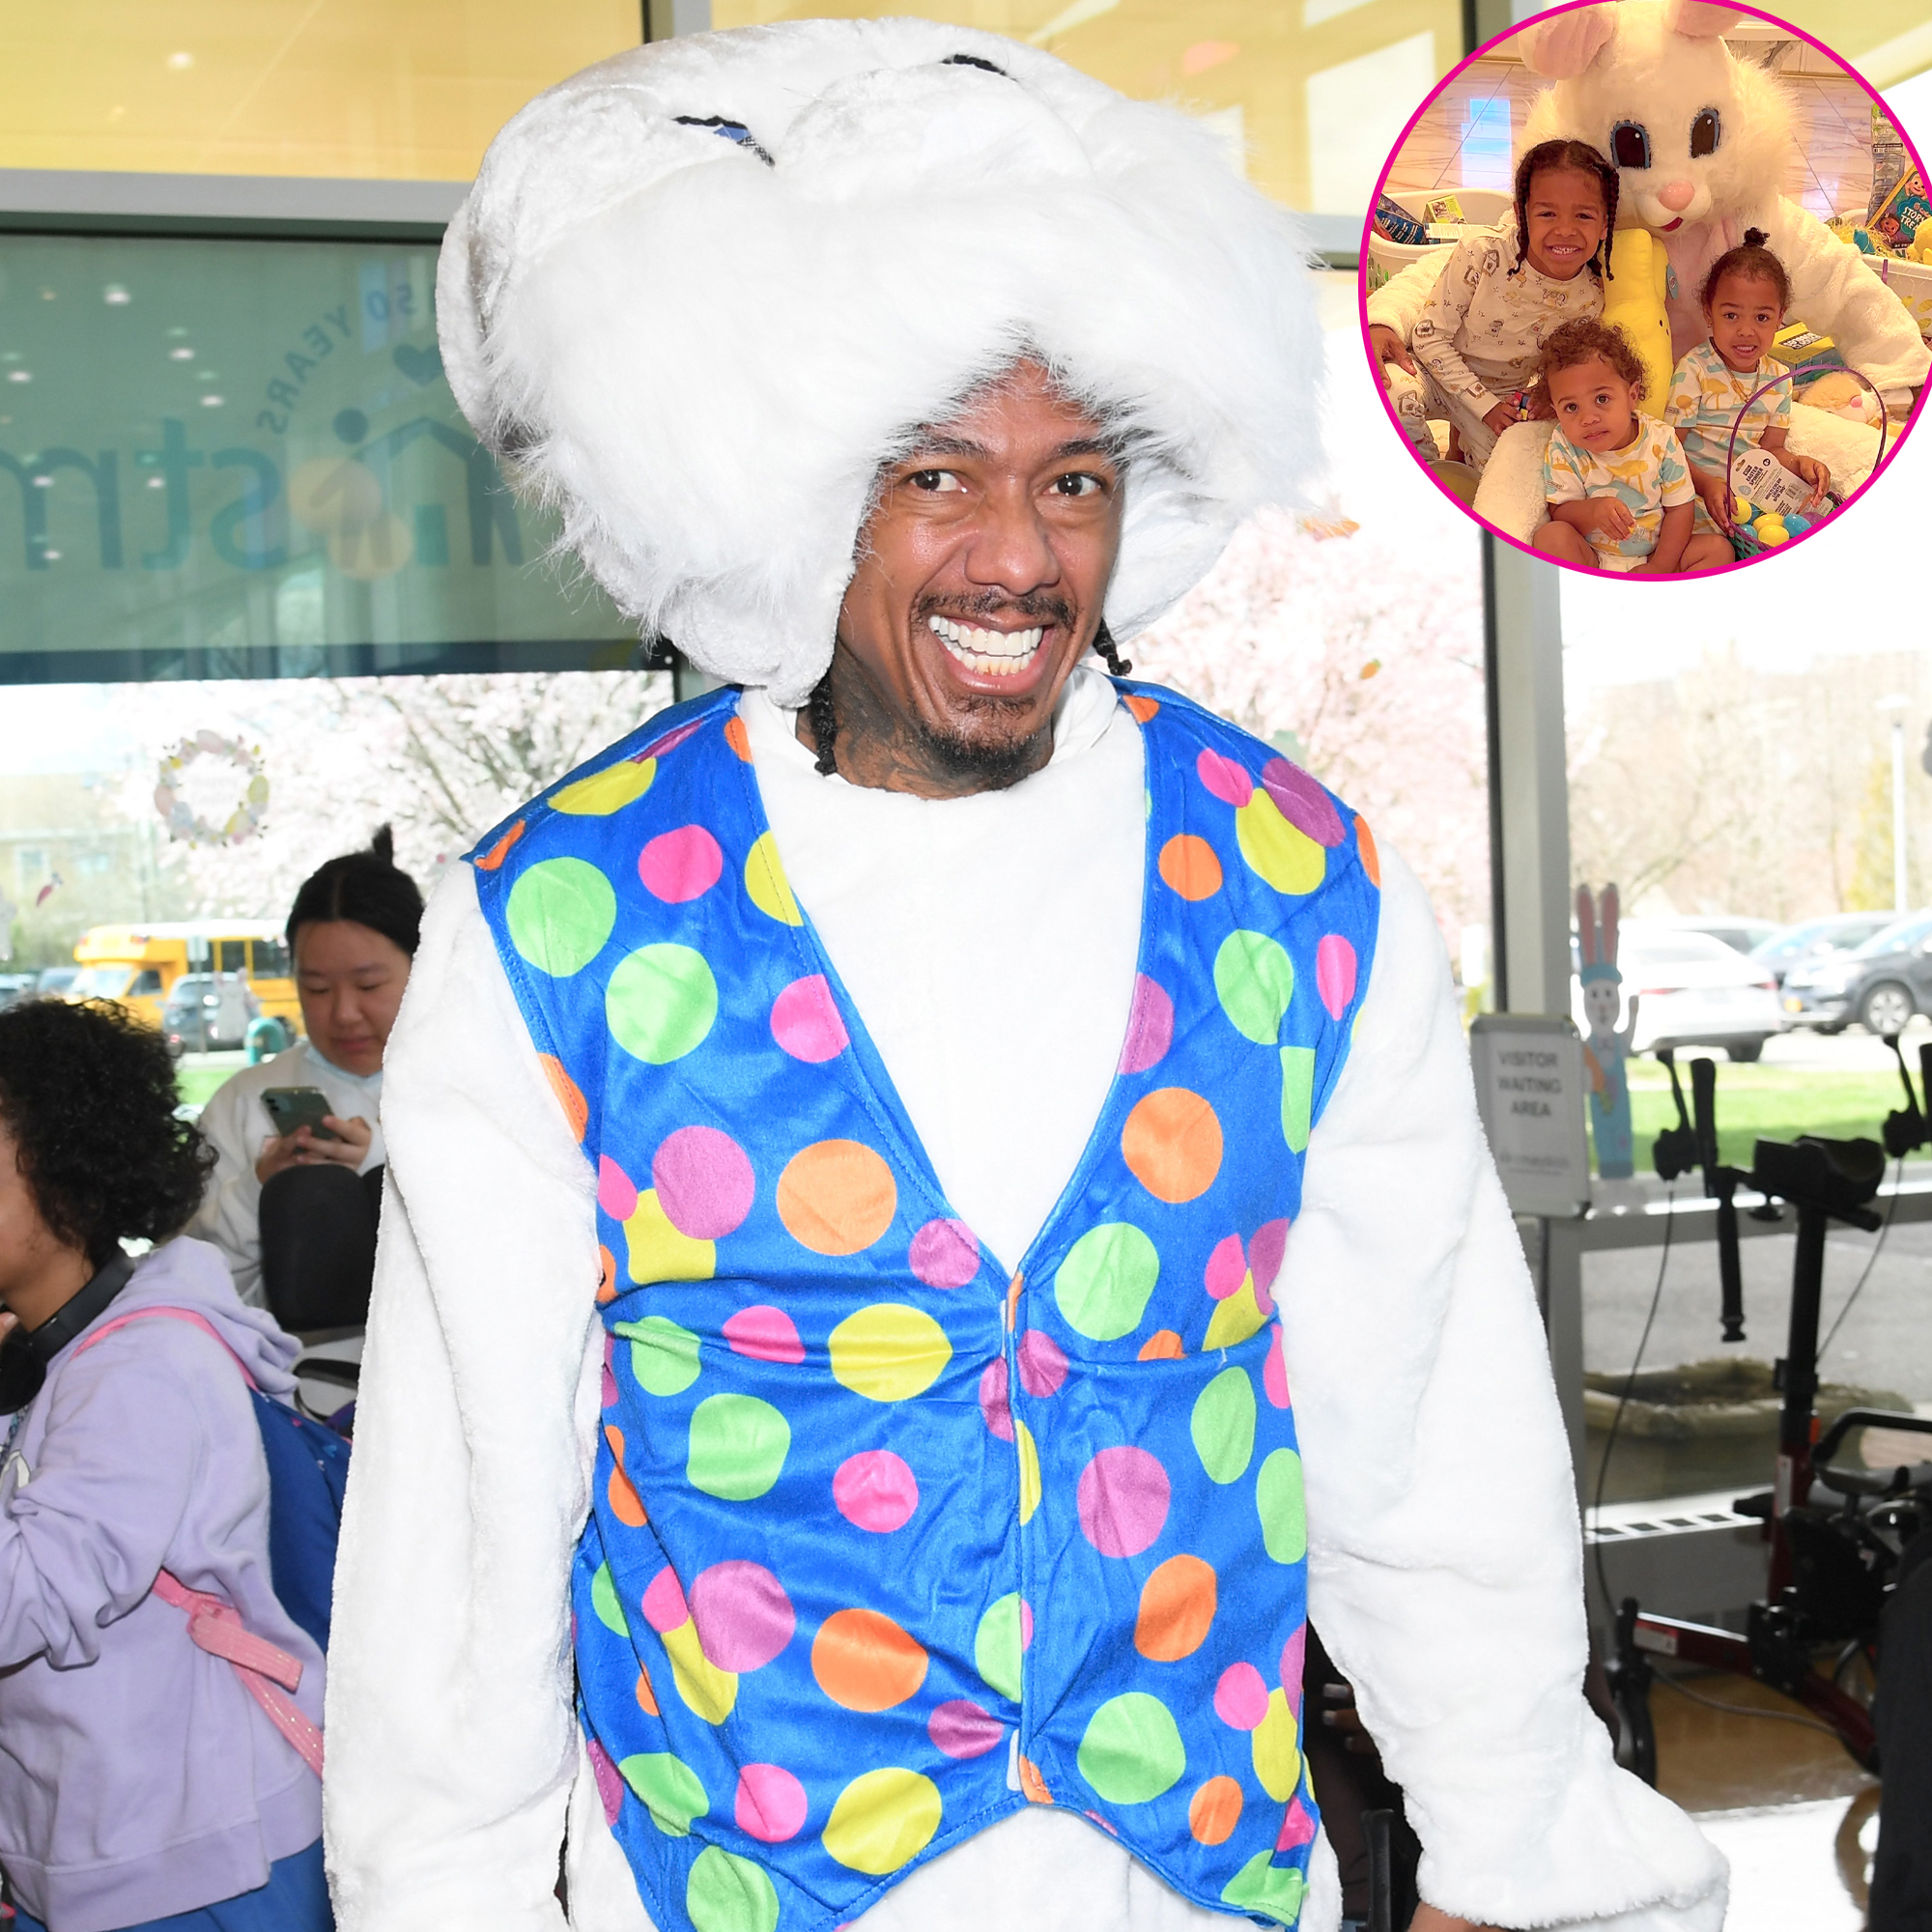 See Nick Cannon Dressed Up as the Easter Bunny With His Kids